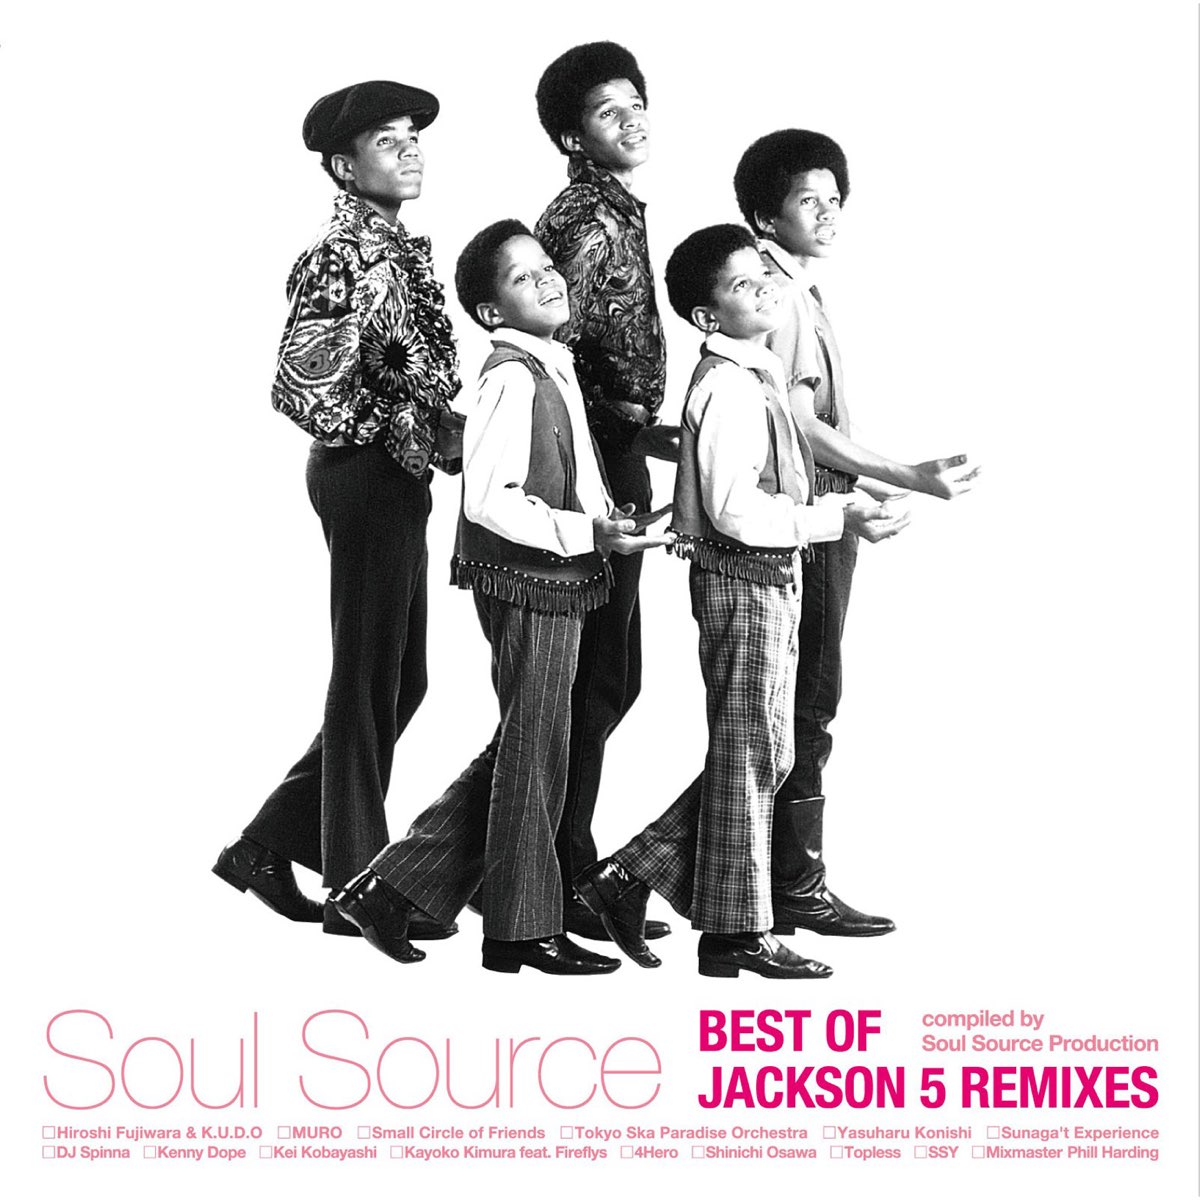 Best of the Jackson 5 Remix - Compiled By Soul Source Production - Album by Jackson  5 & Michael Jackson - Apple Music